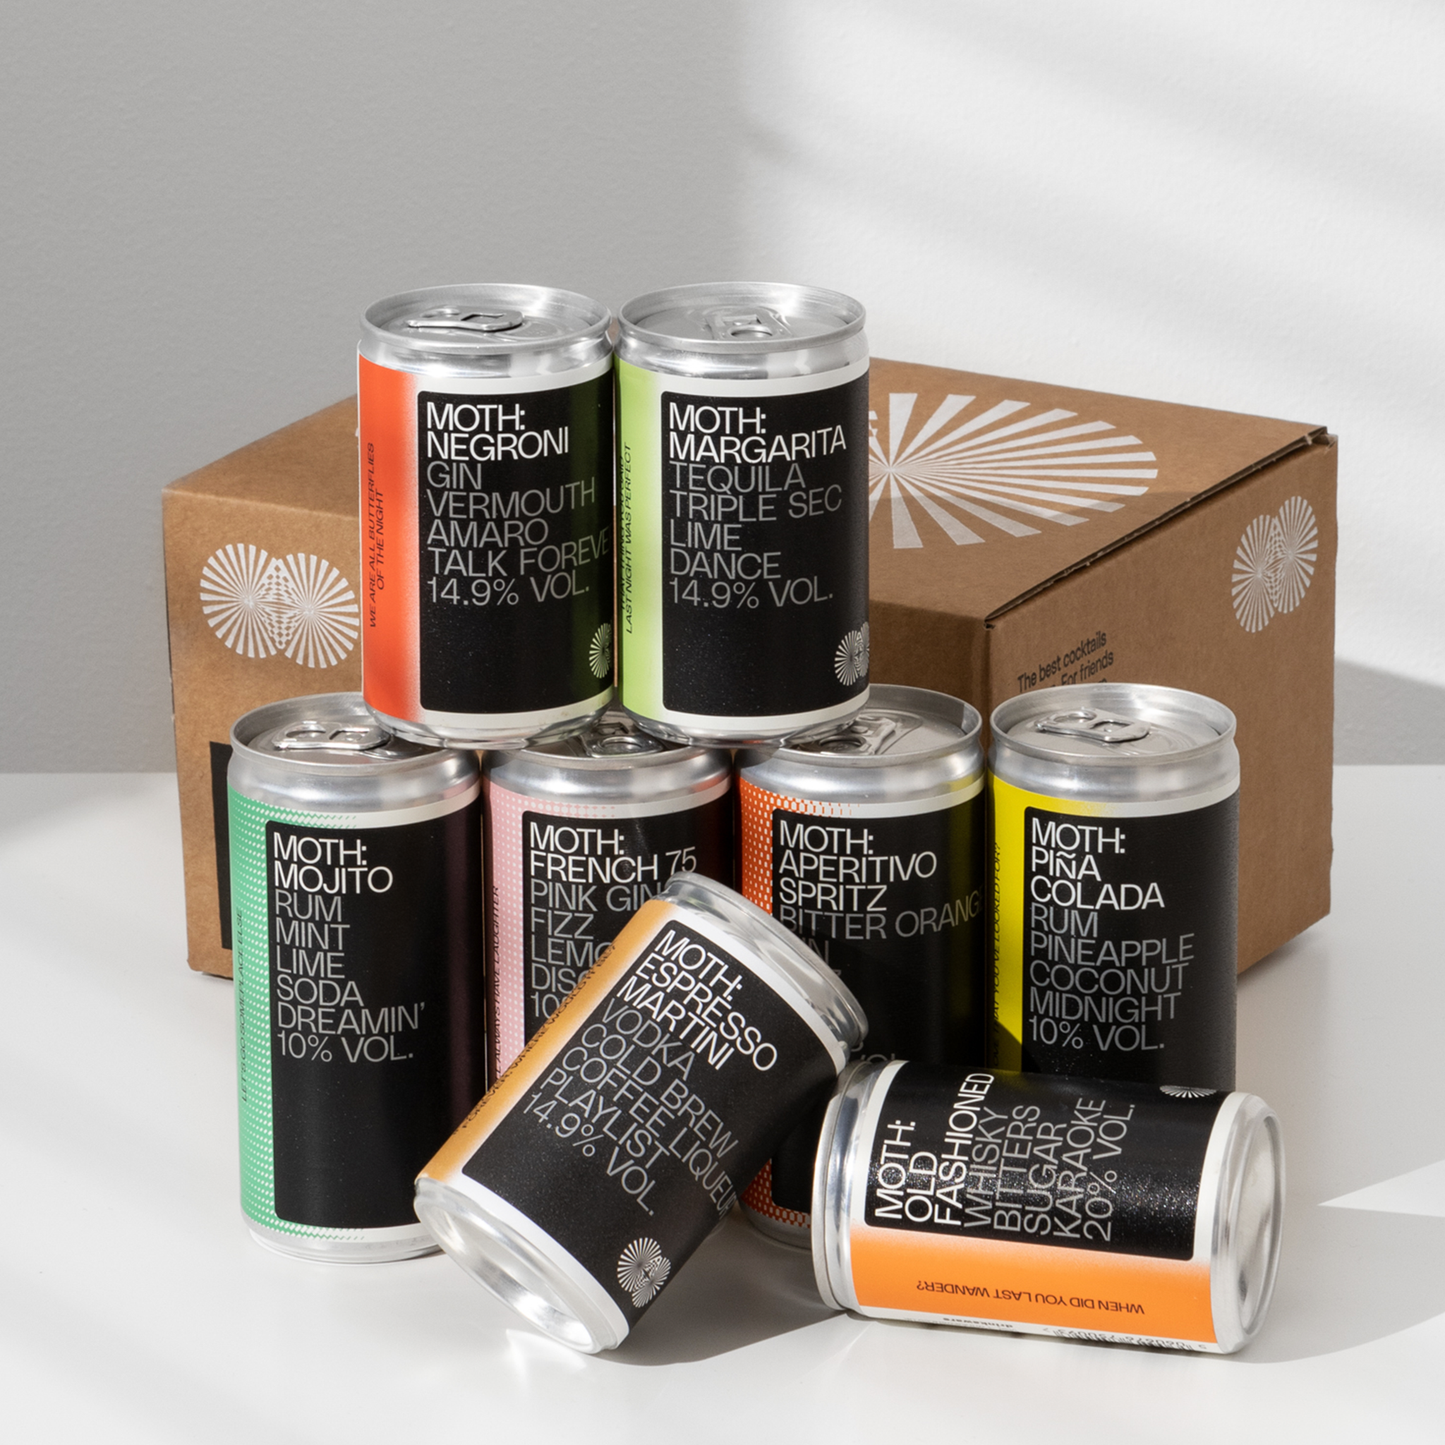 ALCO Orange Crush Canned Cocktail Review – It's just the booze dancing…